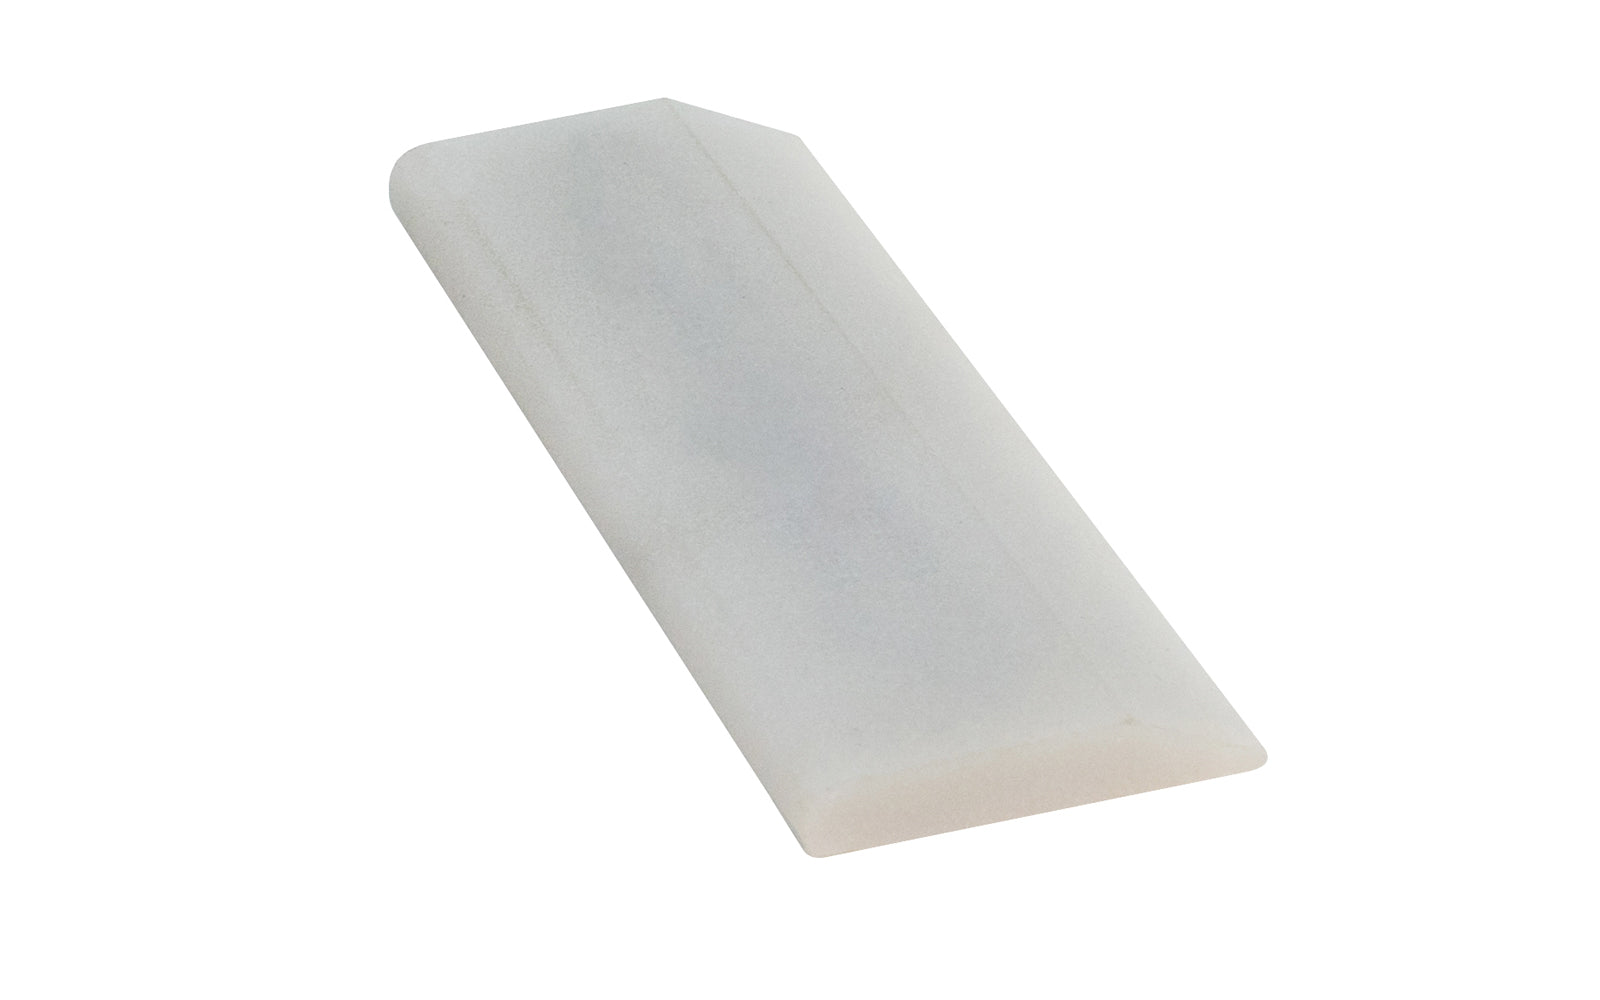 Norton Hard Arkansas Round Edge Small Carving Slip Stone. Great for final edge sharpening of carving tools & gouges. Use a few drops of mineral oil to prevent glazing while sharpening. 3